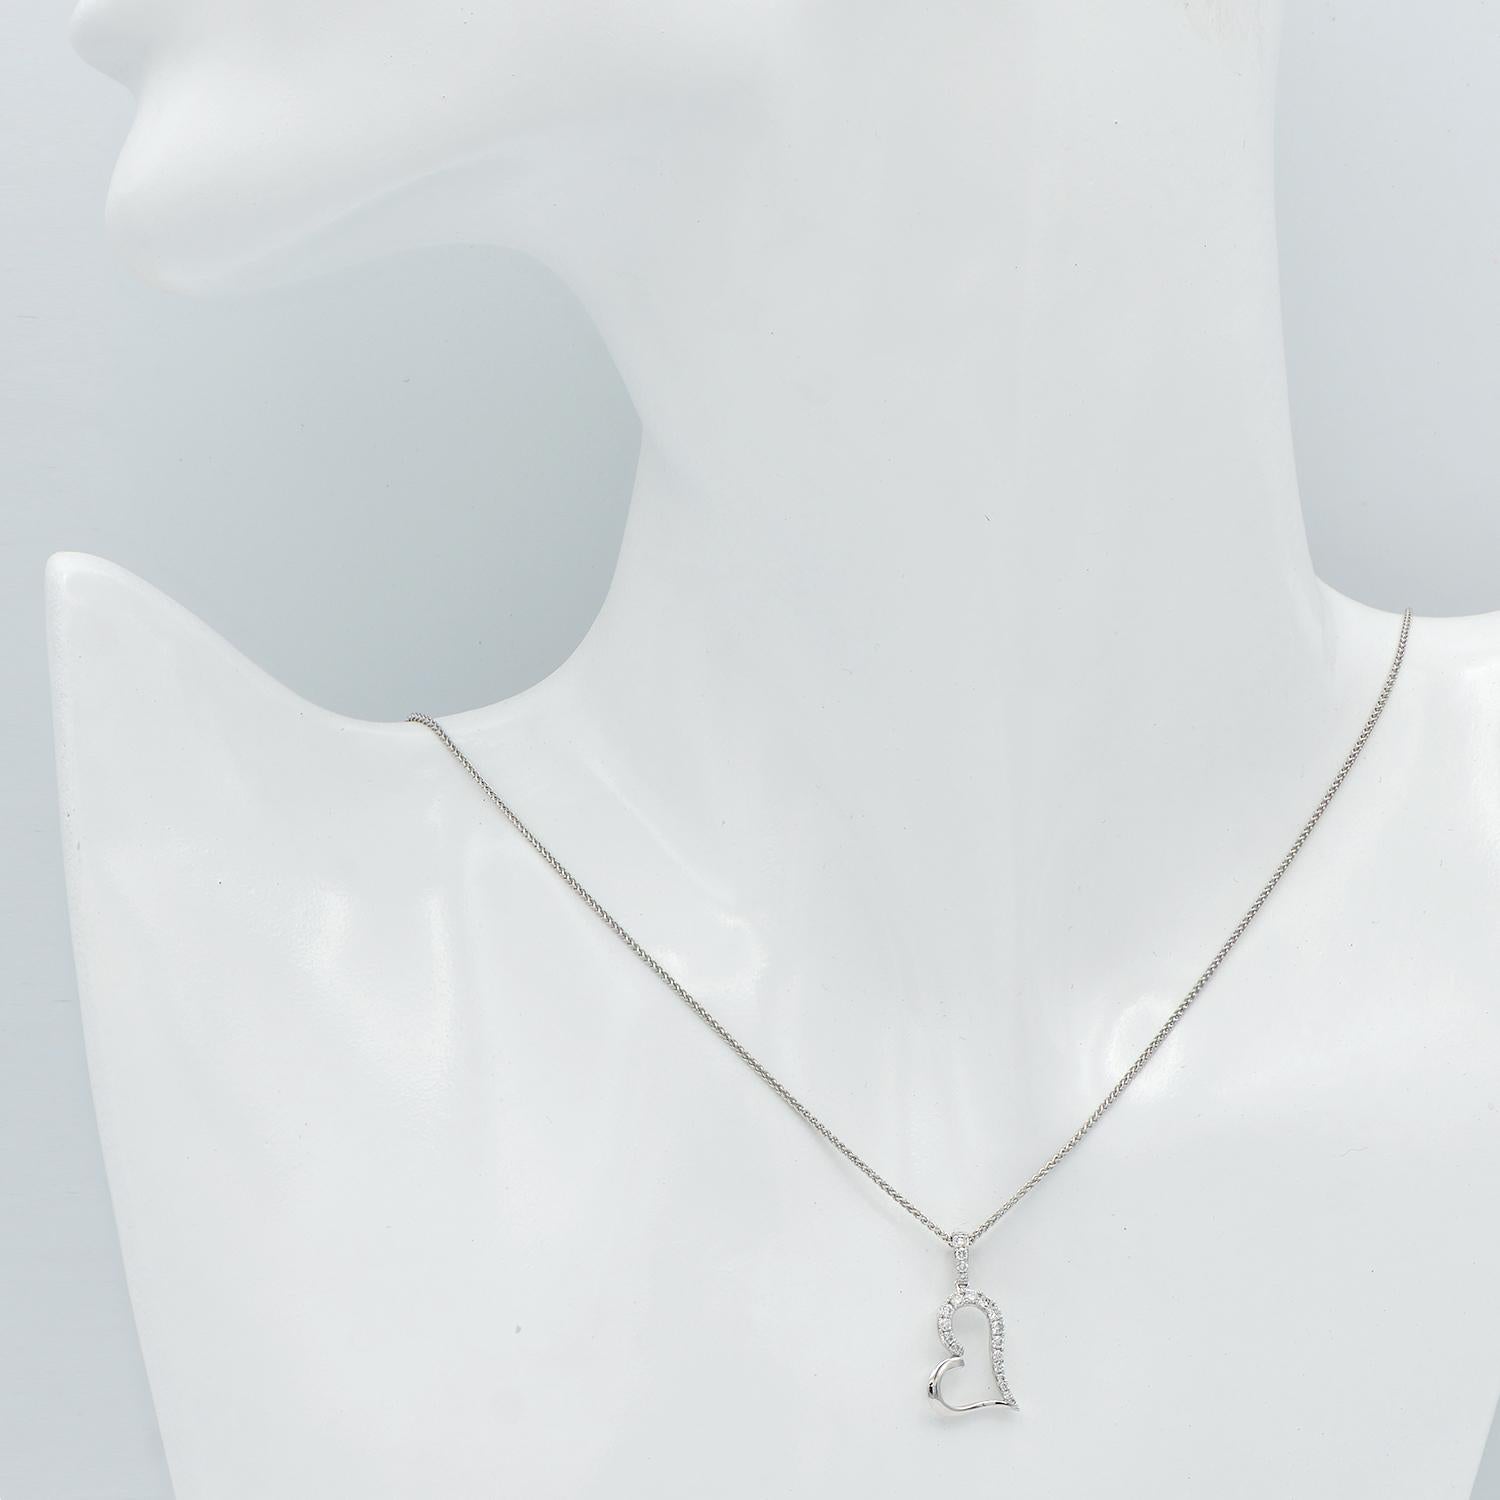 Contemporary 18K White Gold Hanging Heart Diamond Necklace